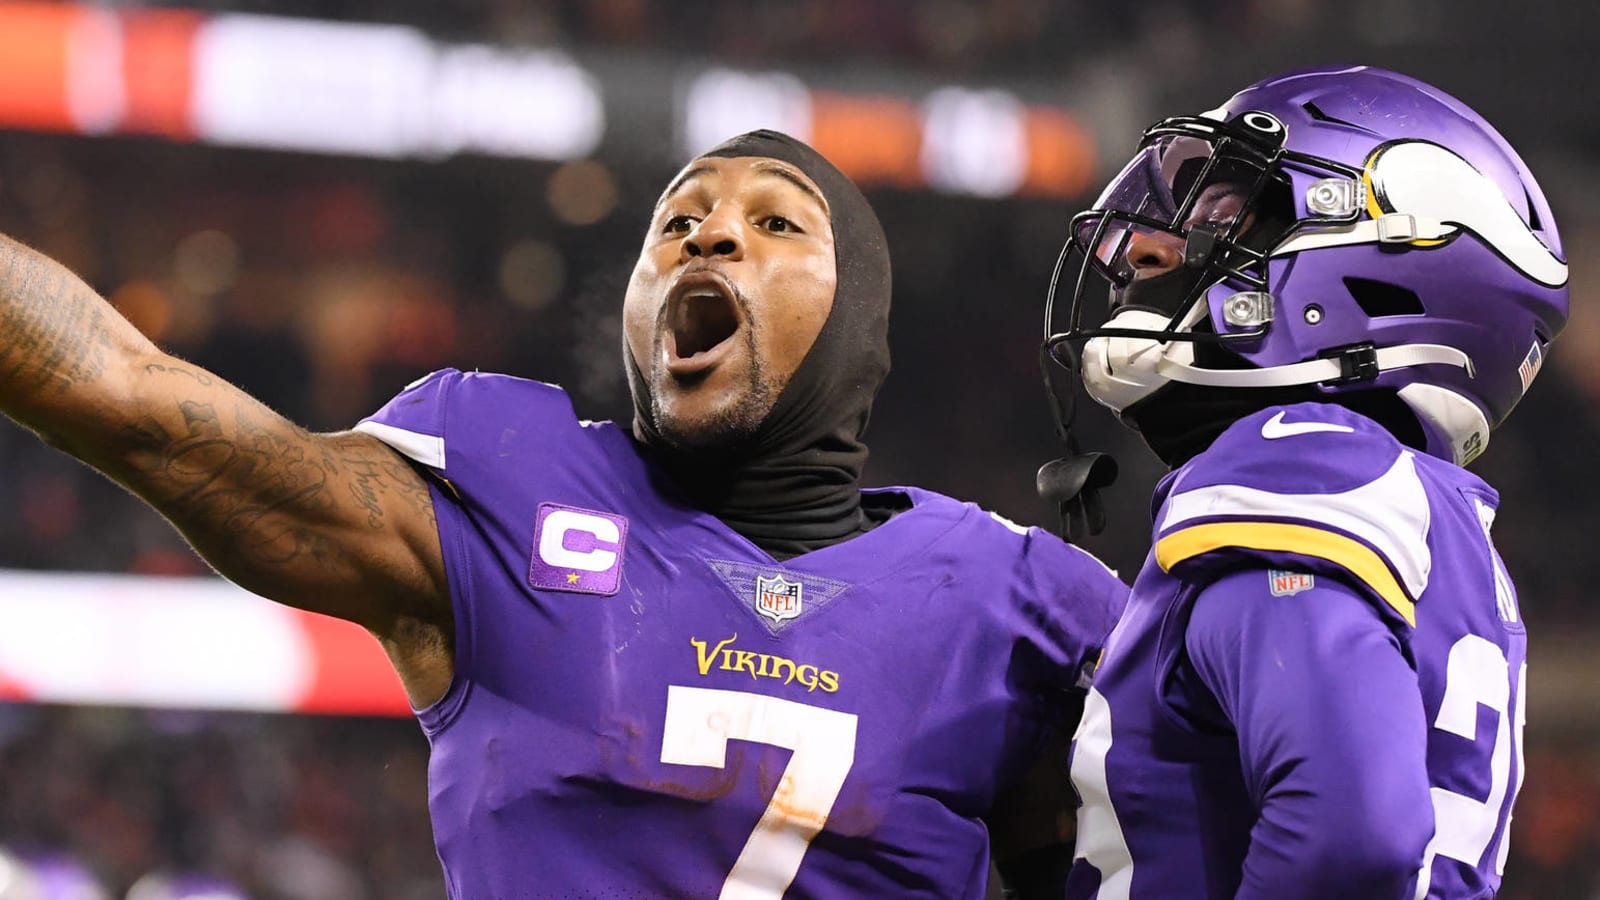 Vikings stay in playoff contention with 17-9 win vs. Bears